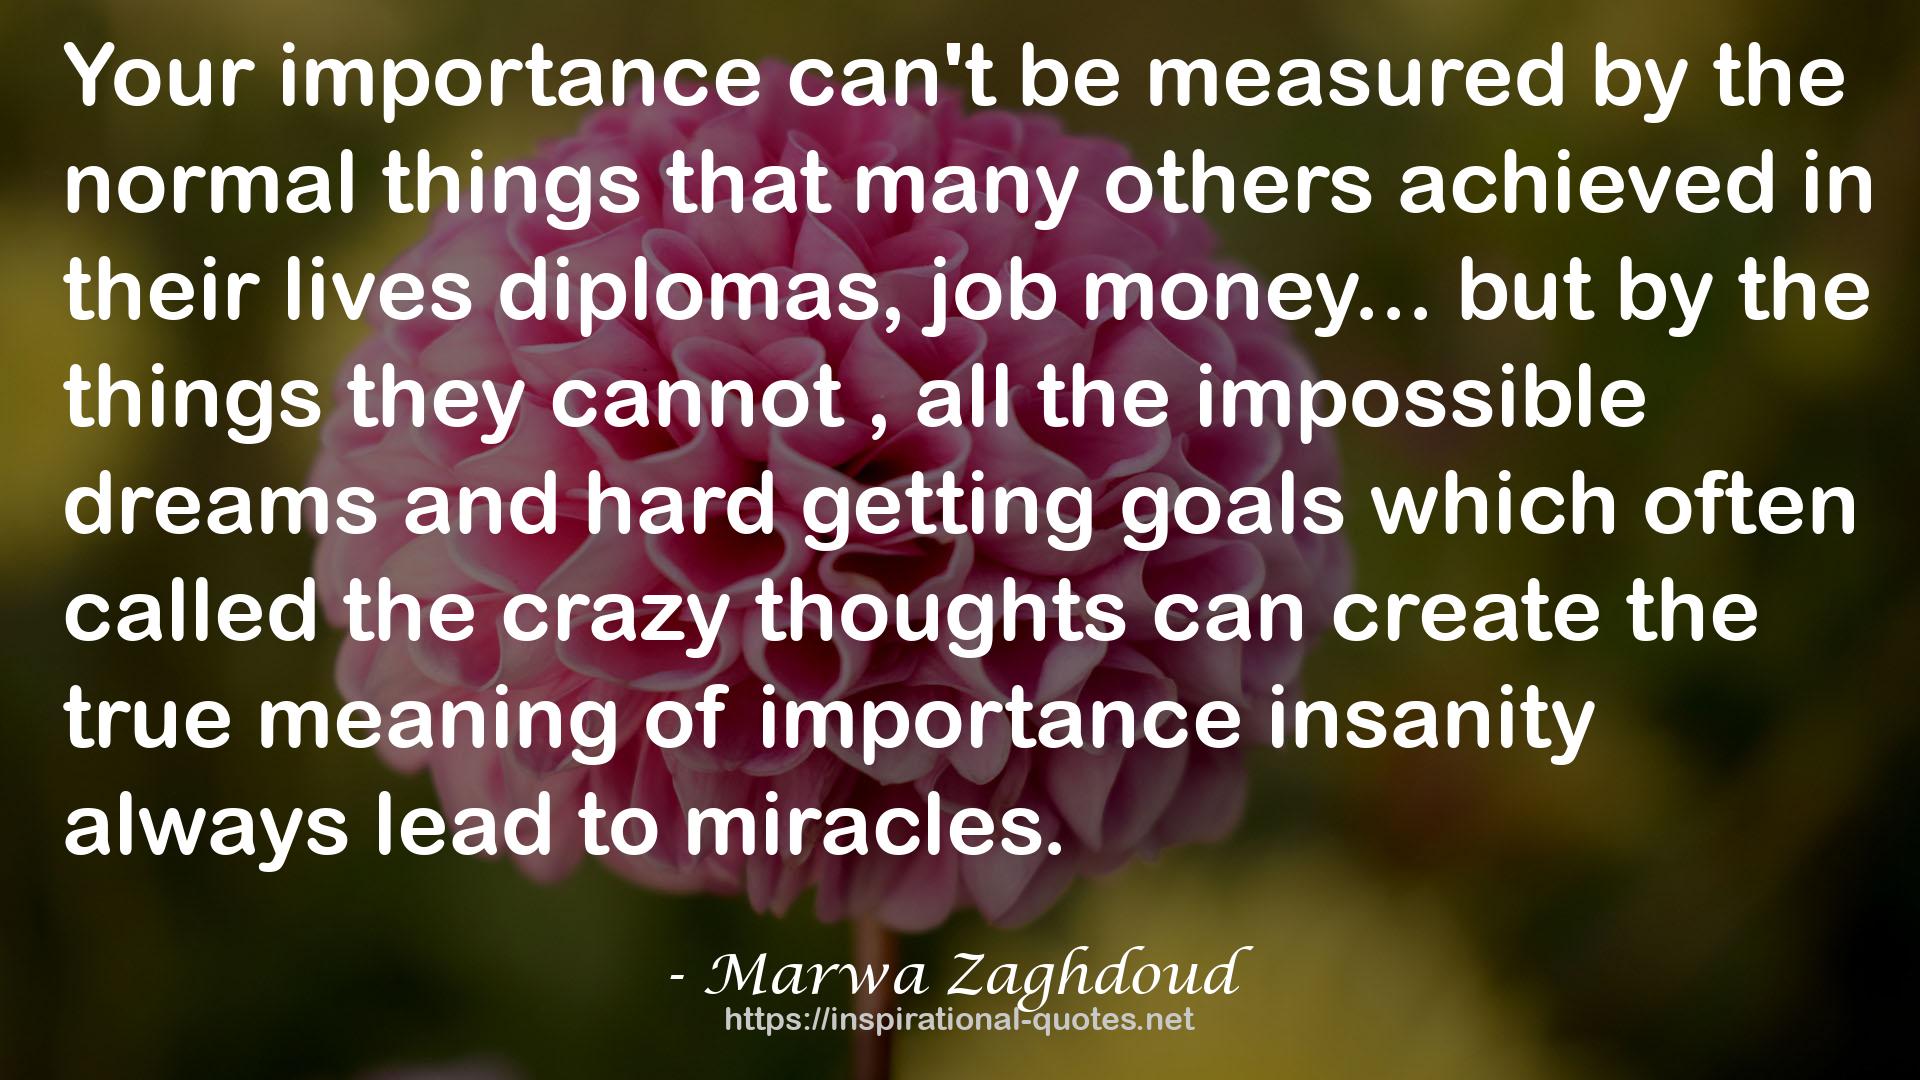 Marwa Zaghdoud QUOTES